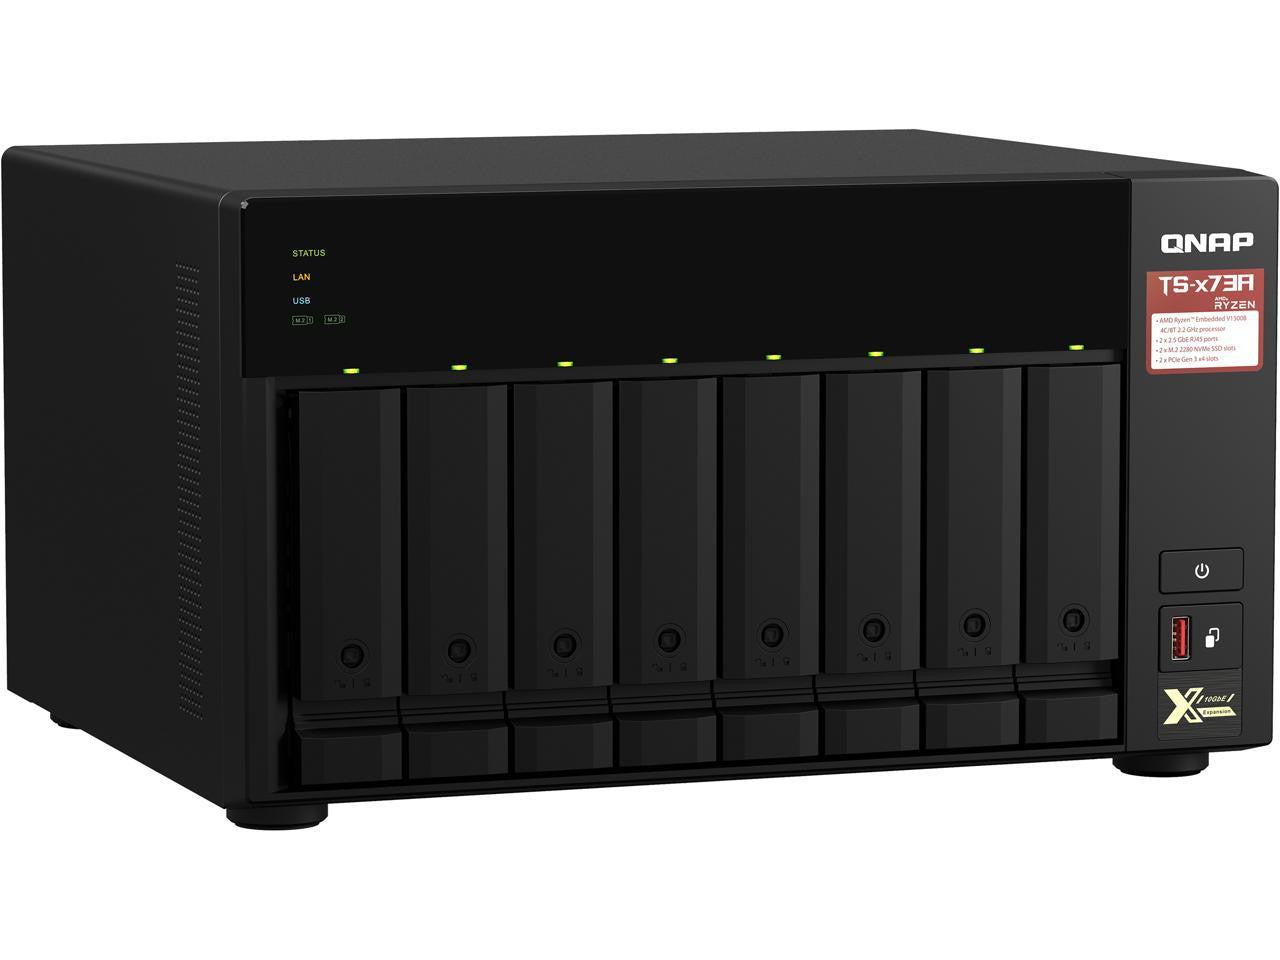 QNAP TS-873A 8-BAY NAS with 64GB DDR4 RAM and 112TB (8x14TB) Western Digital RED PLUS Drives Fully Assembled and Tested